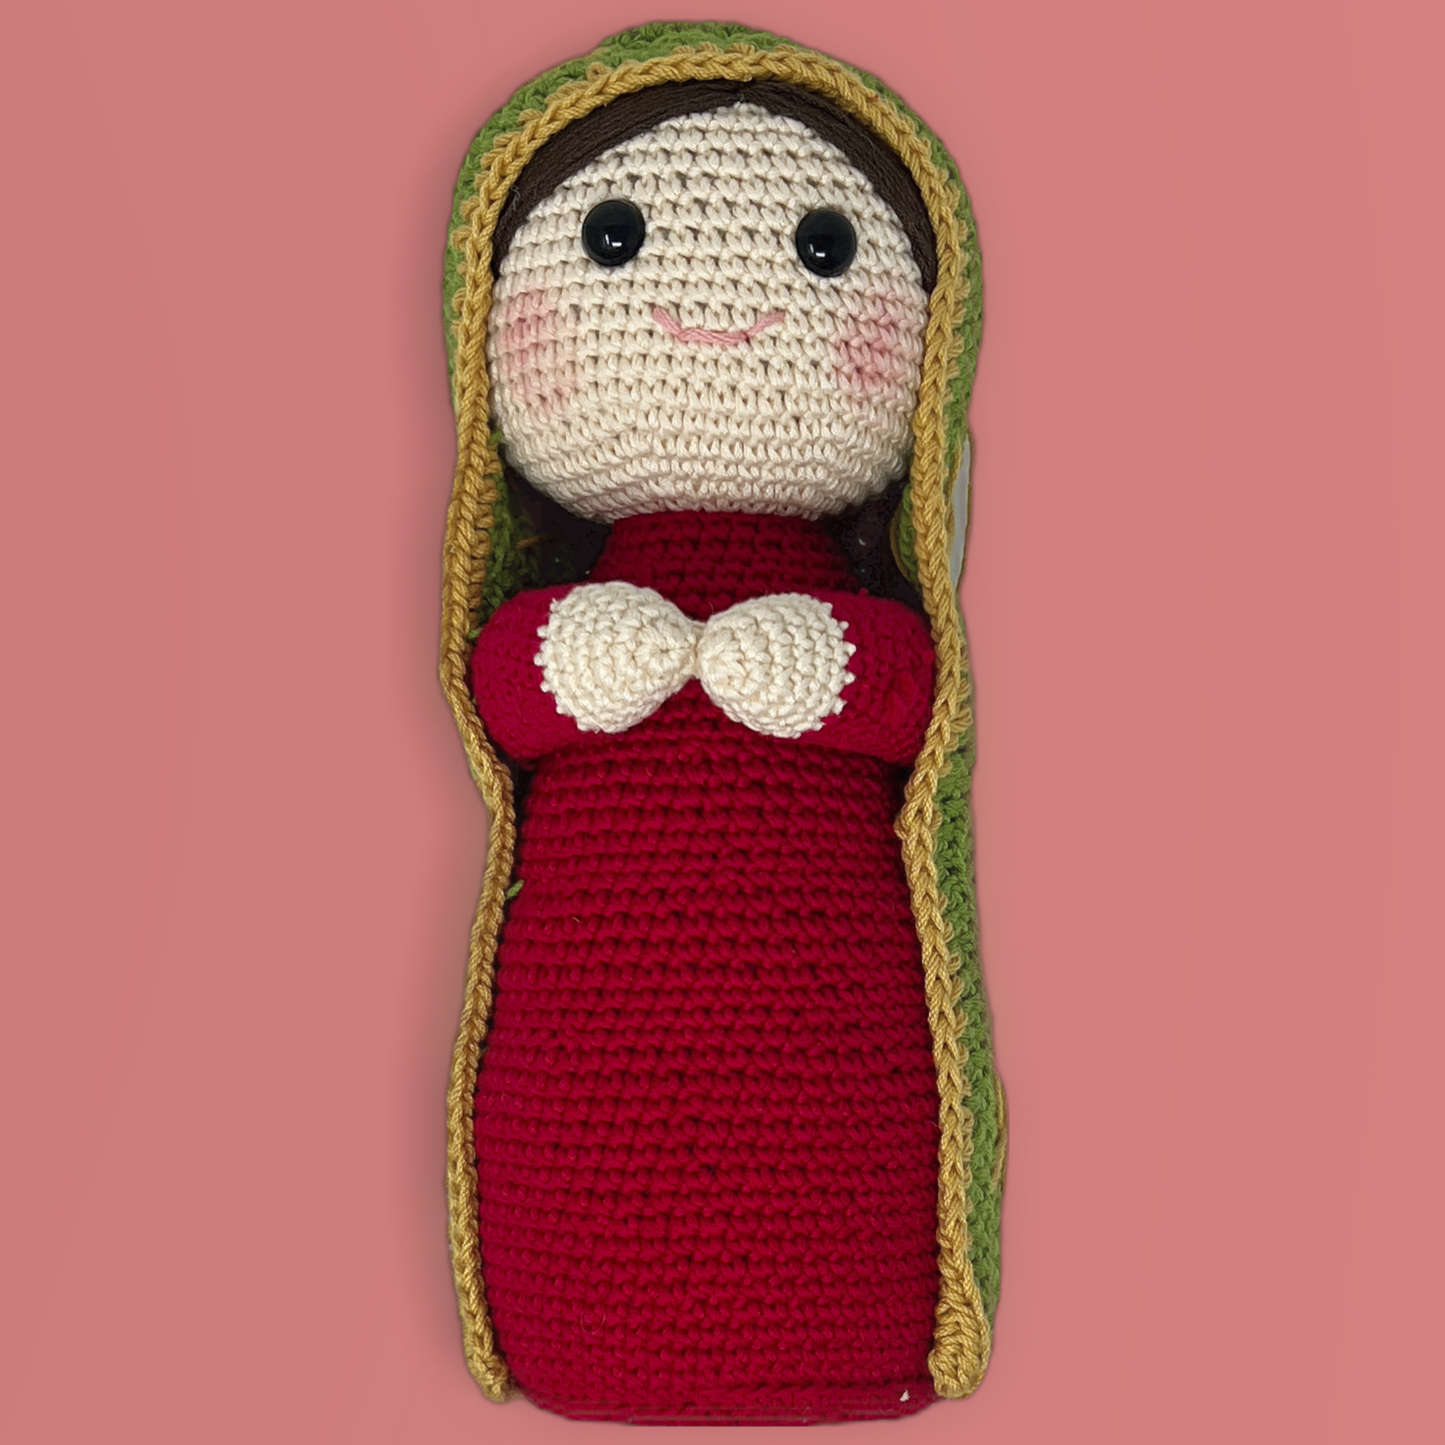 Handmade crochet dolls and is made with red dress and green manta. the doll's eye are open and is in a pink background and crafted by hand